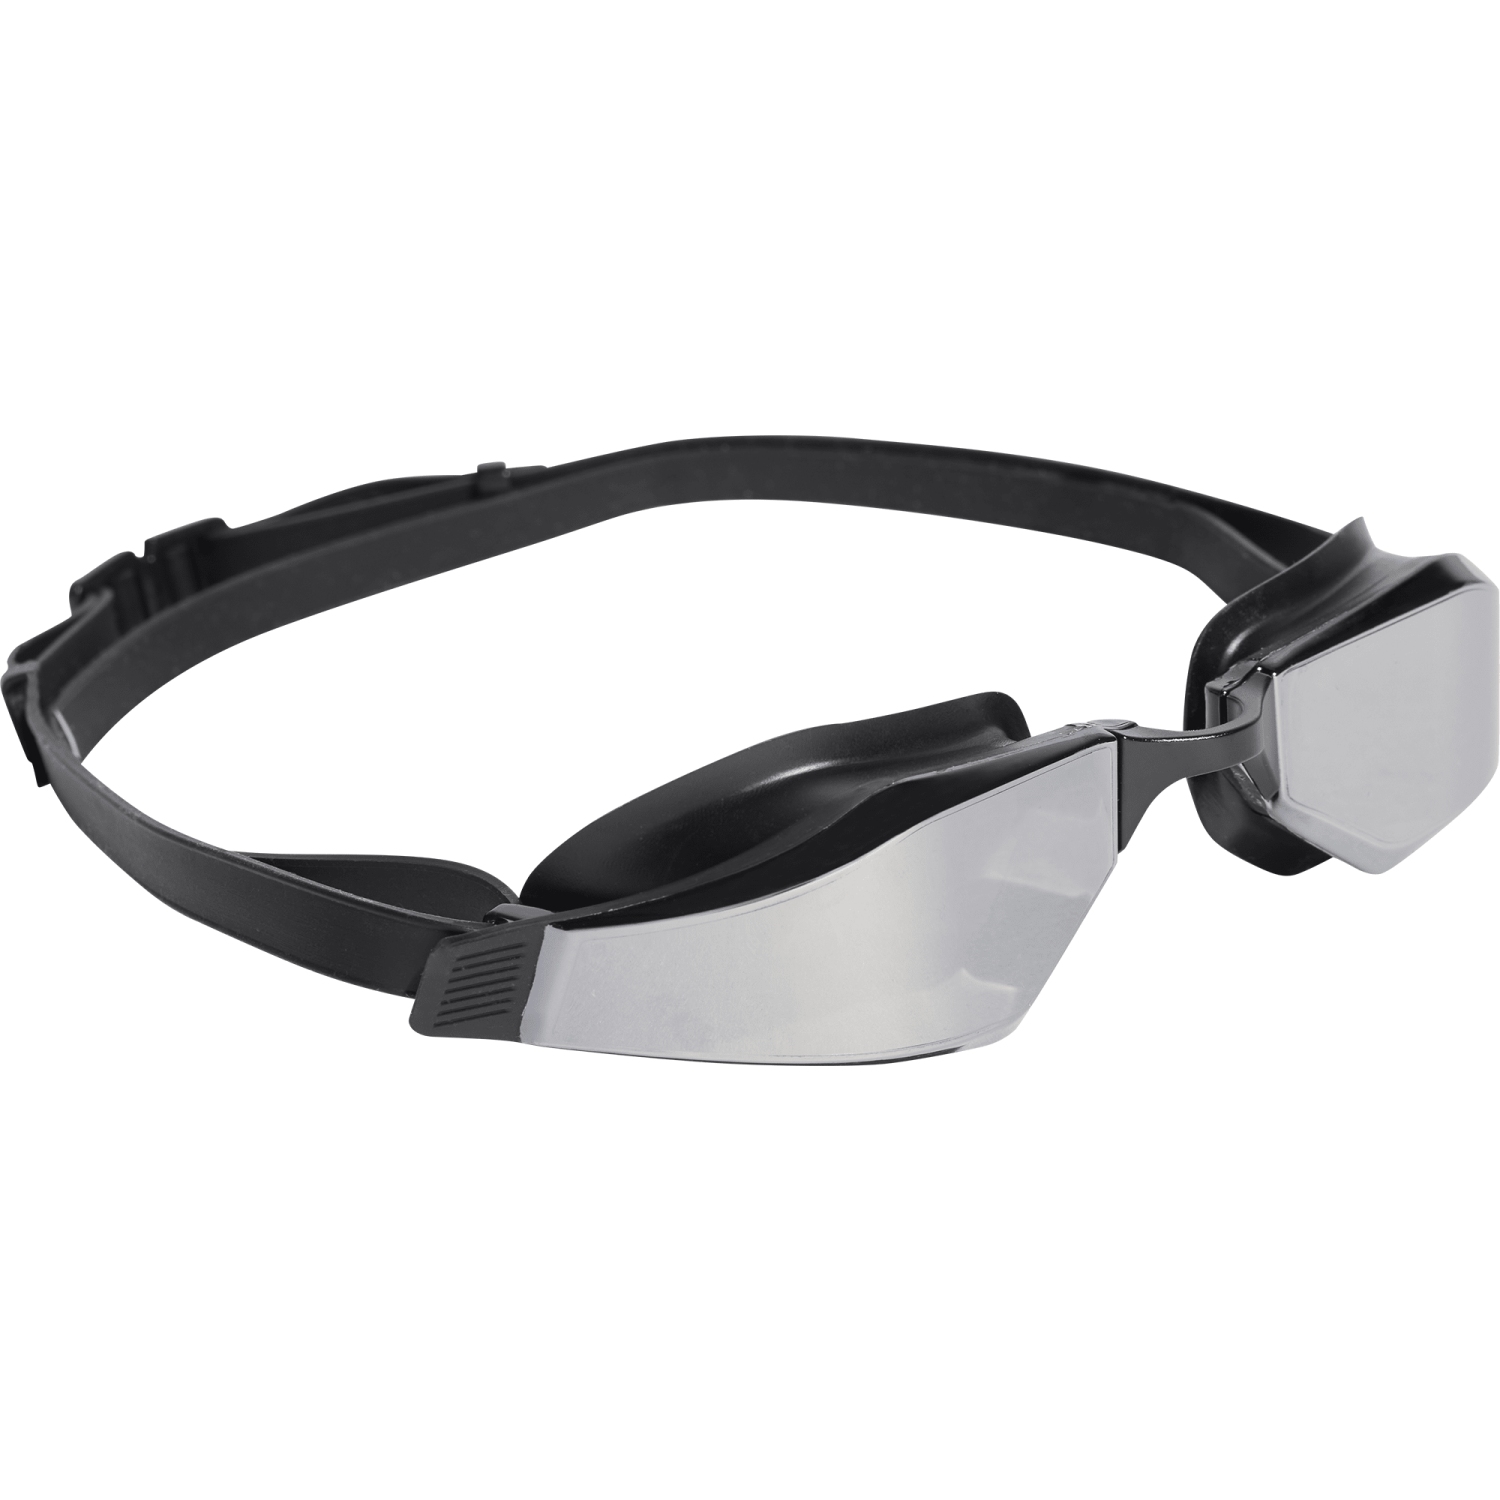 Picture of adidas Ripstream Speed Swim Goggles - black/carbon IK9658 - mirrored